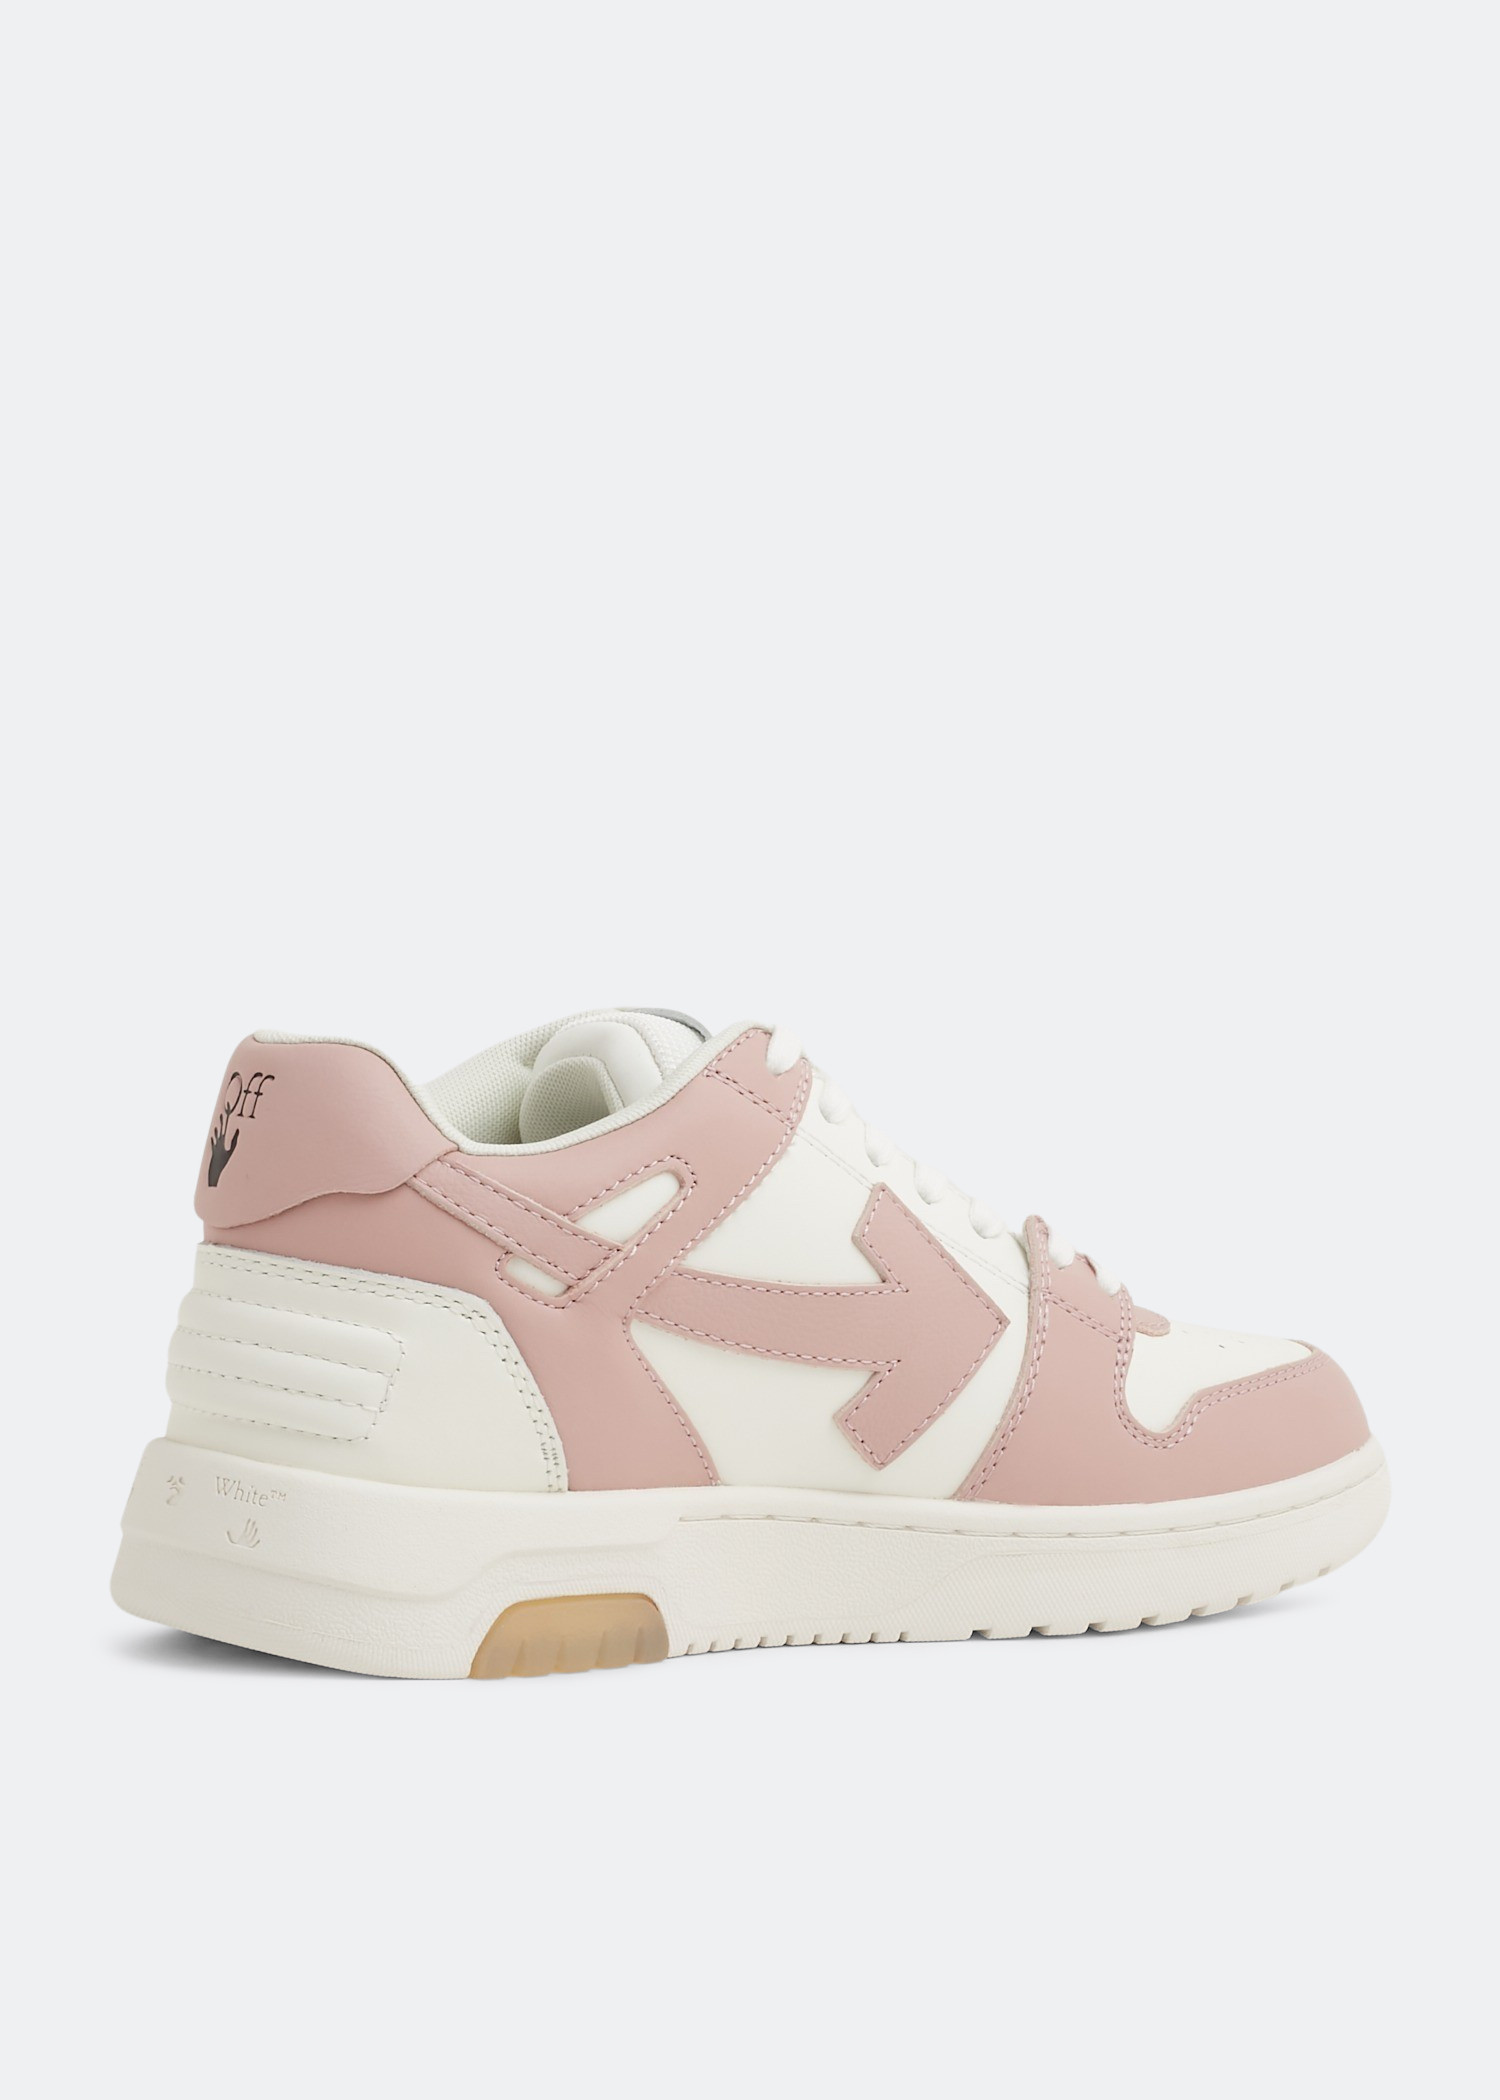 Off-White Out Of Office 'OOO' sneakers for Women - White in KSA 